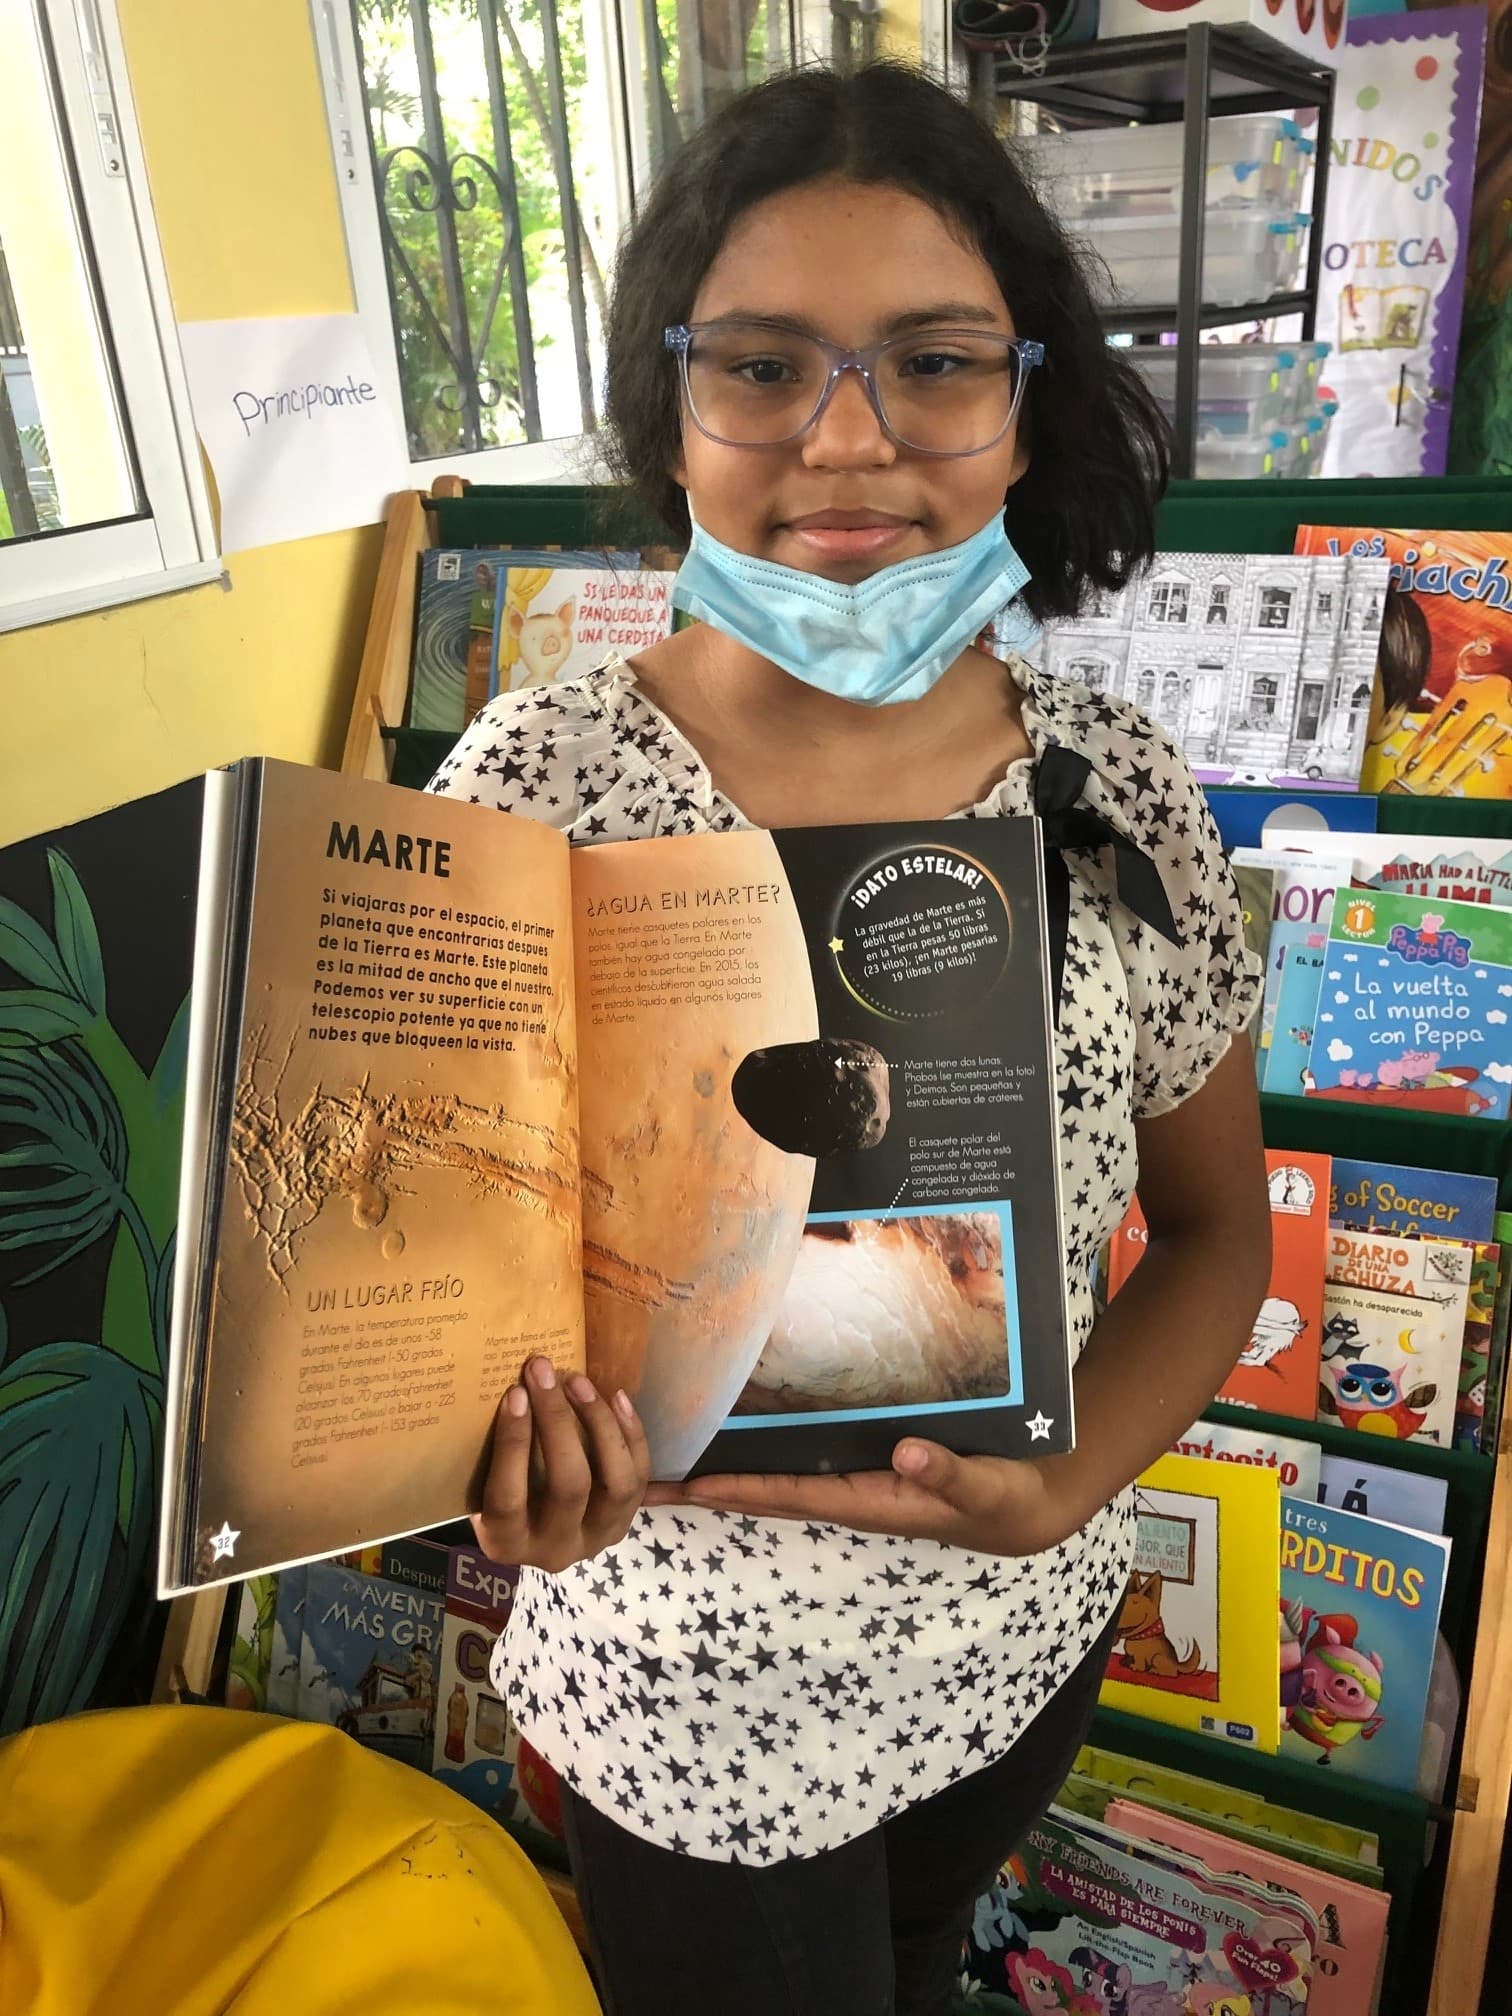 Nasaret Pereira, 11, says she didn't read much before the library came to her school as she didn't have any books at home.  (Karyn Miller-Medzon/Here & Now)